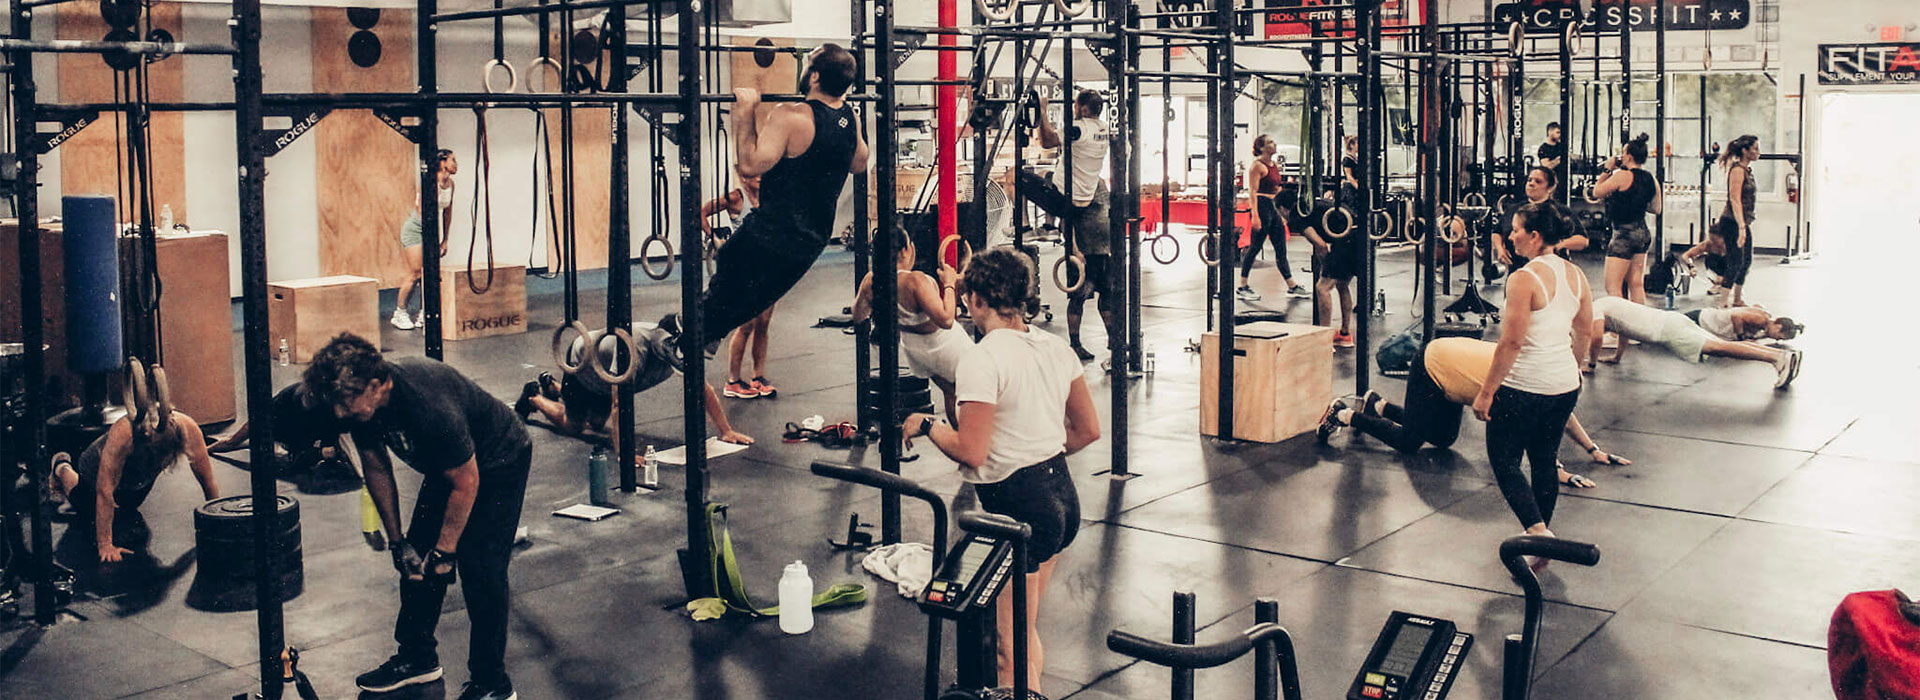 Top 5 Best CrossFit Gyms To Join Near Flemington